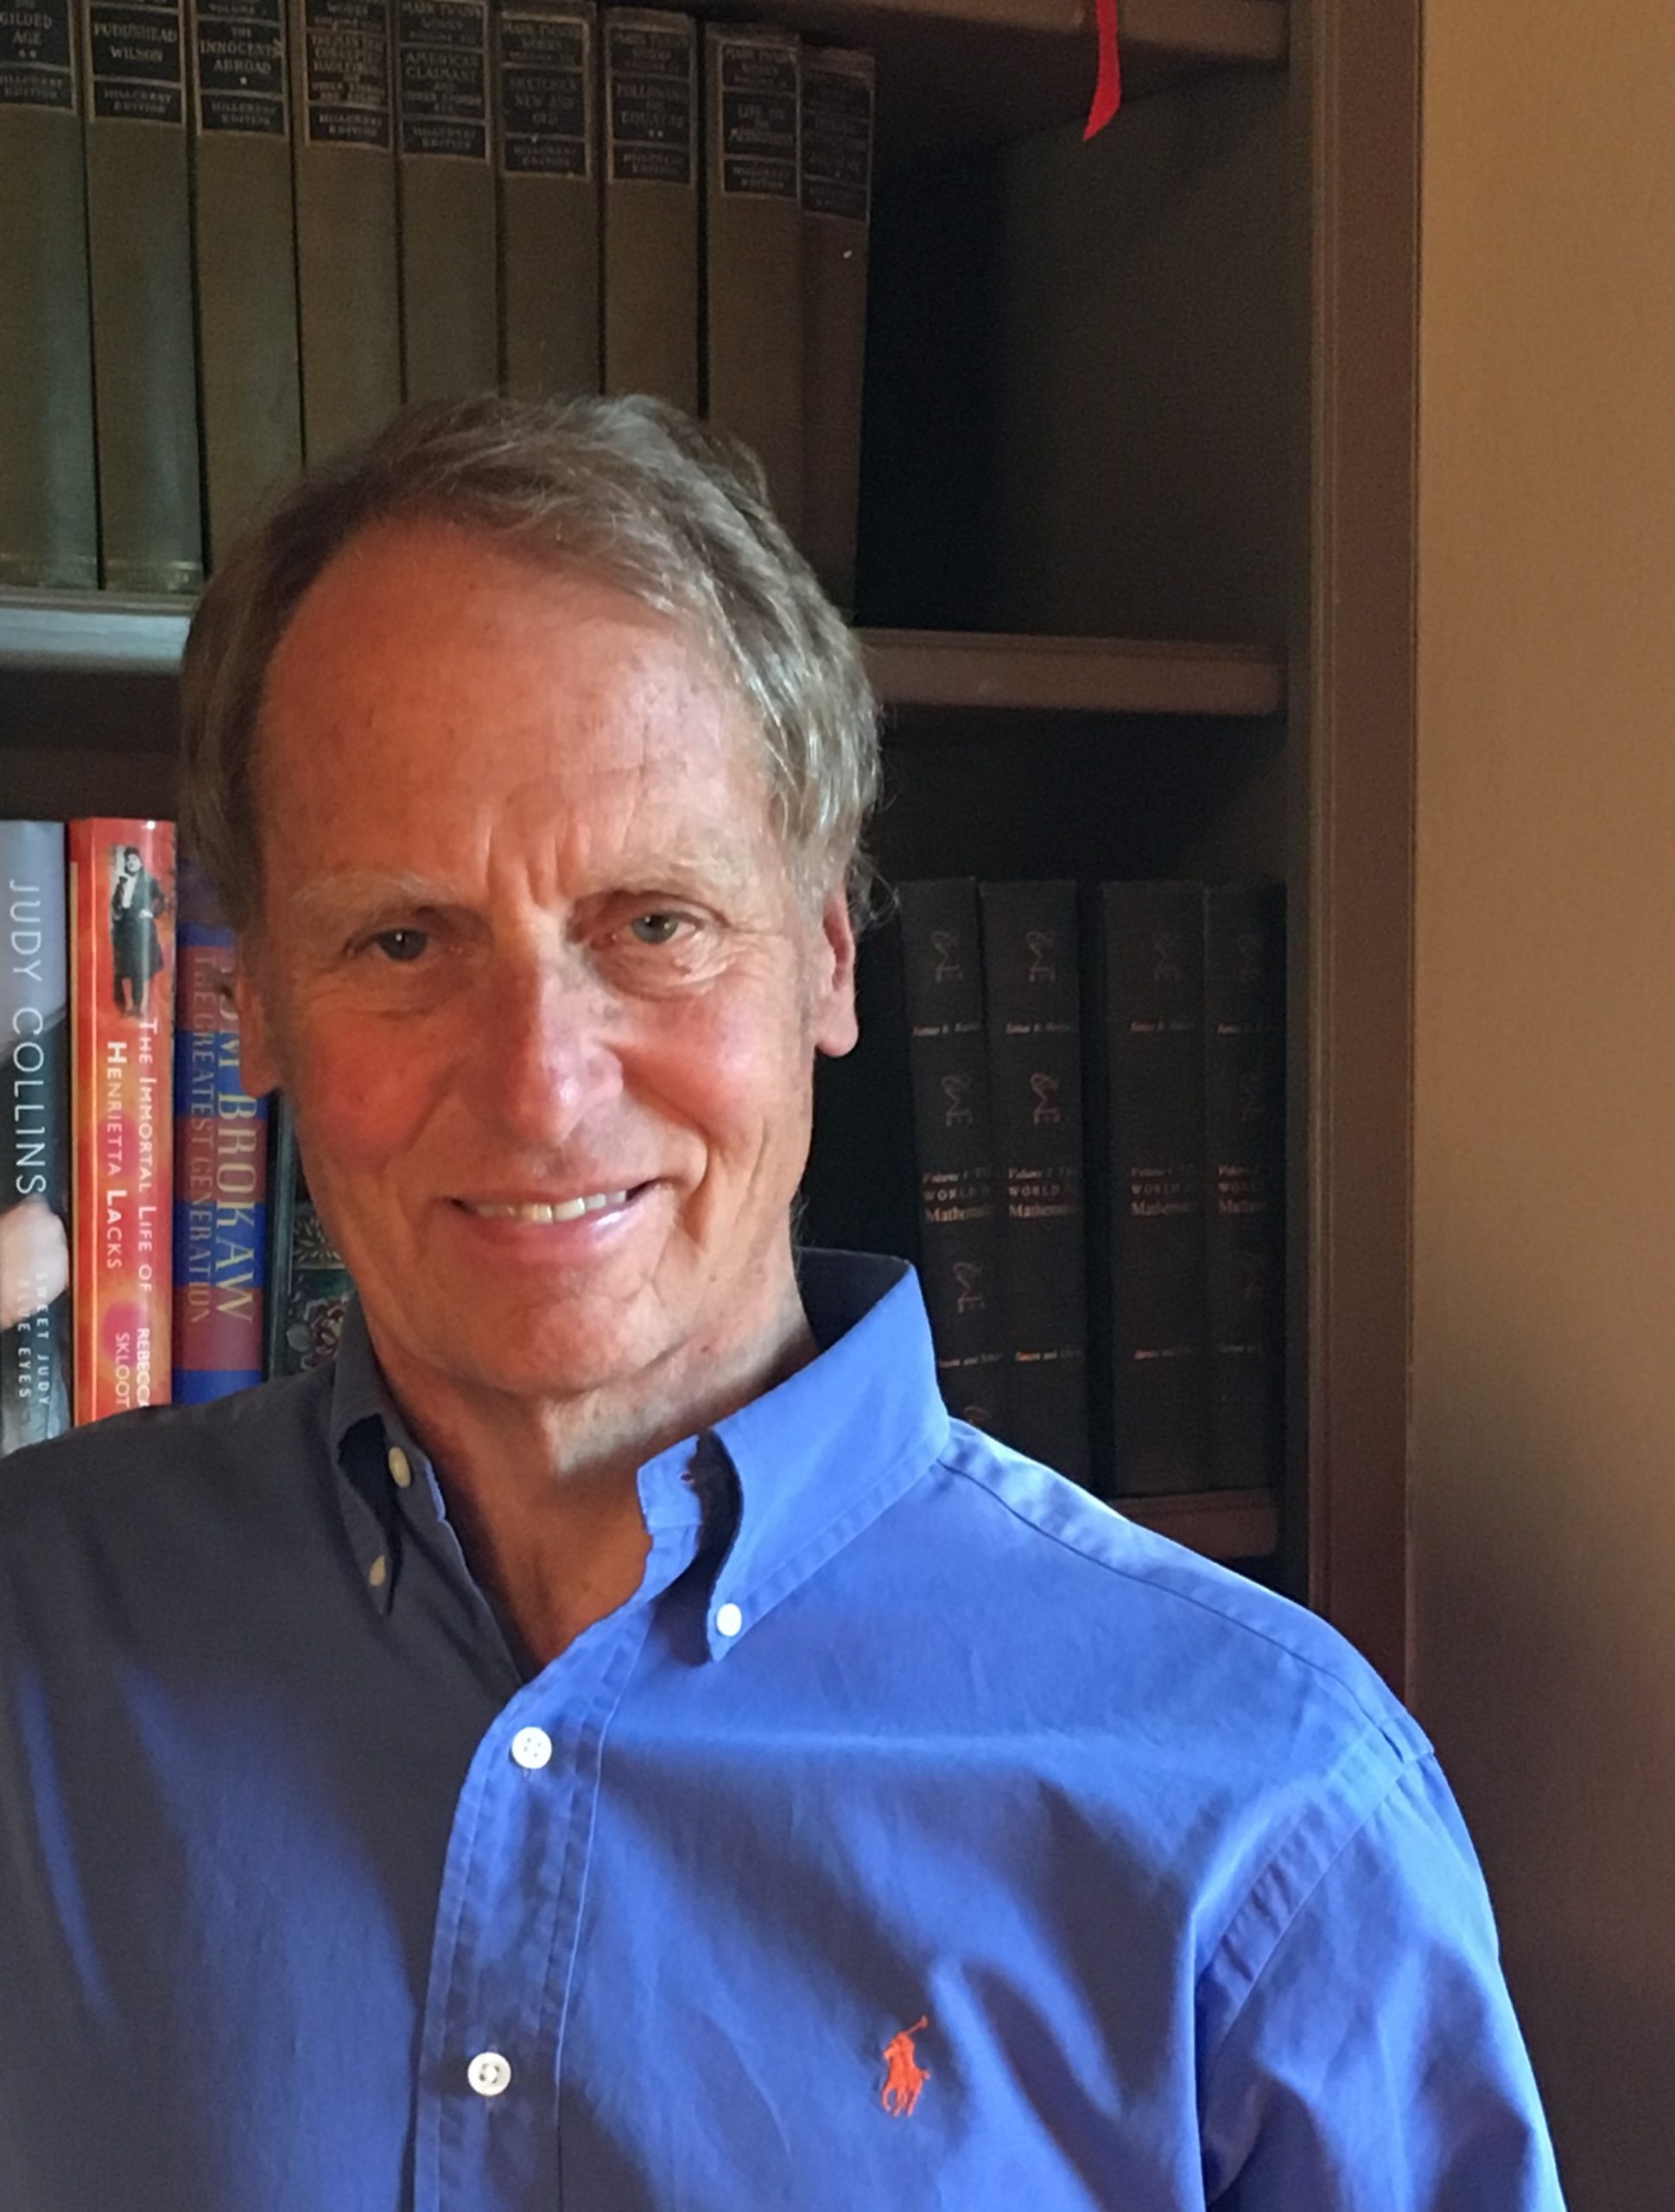 John Carlquist smiles while standing in front of his bookshelf